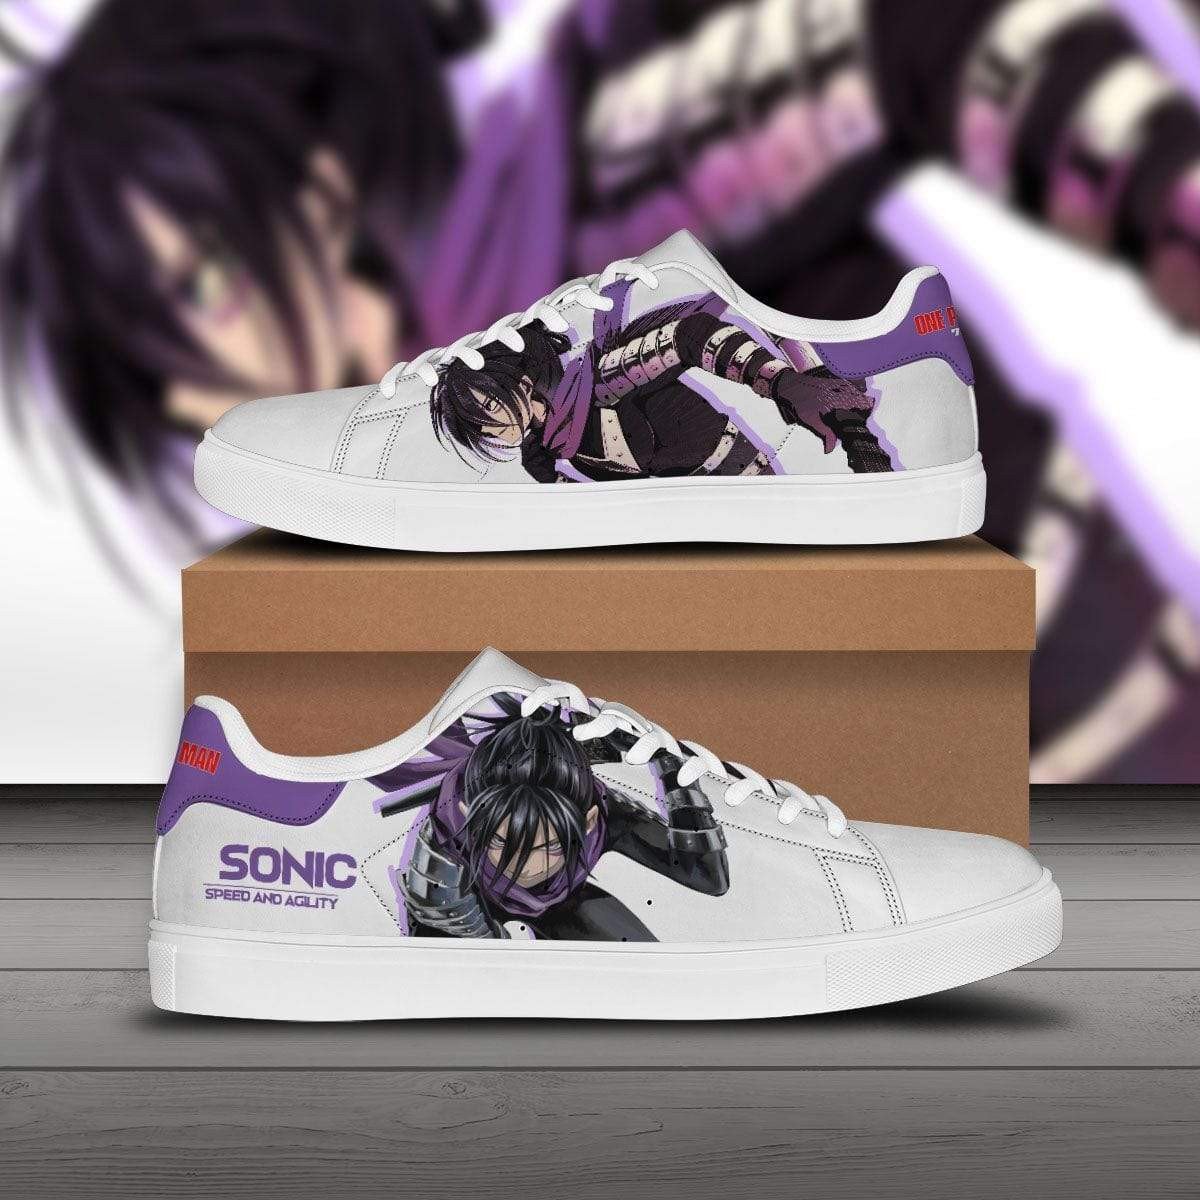 sound sonic skate sneakers custom one punch man anime shoes